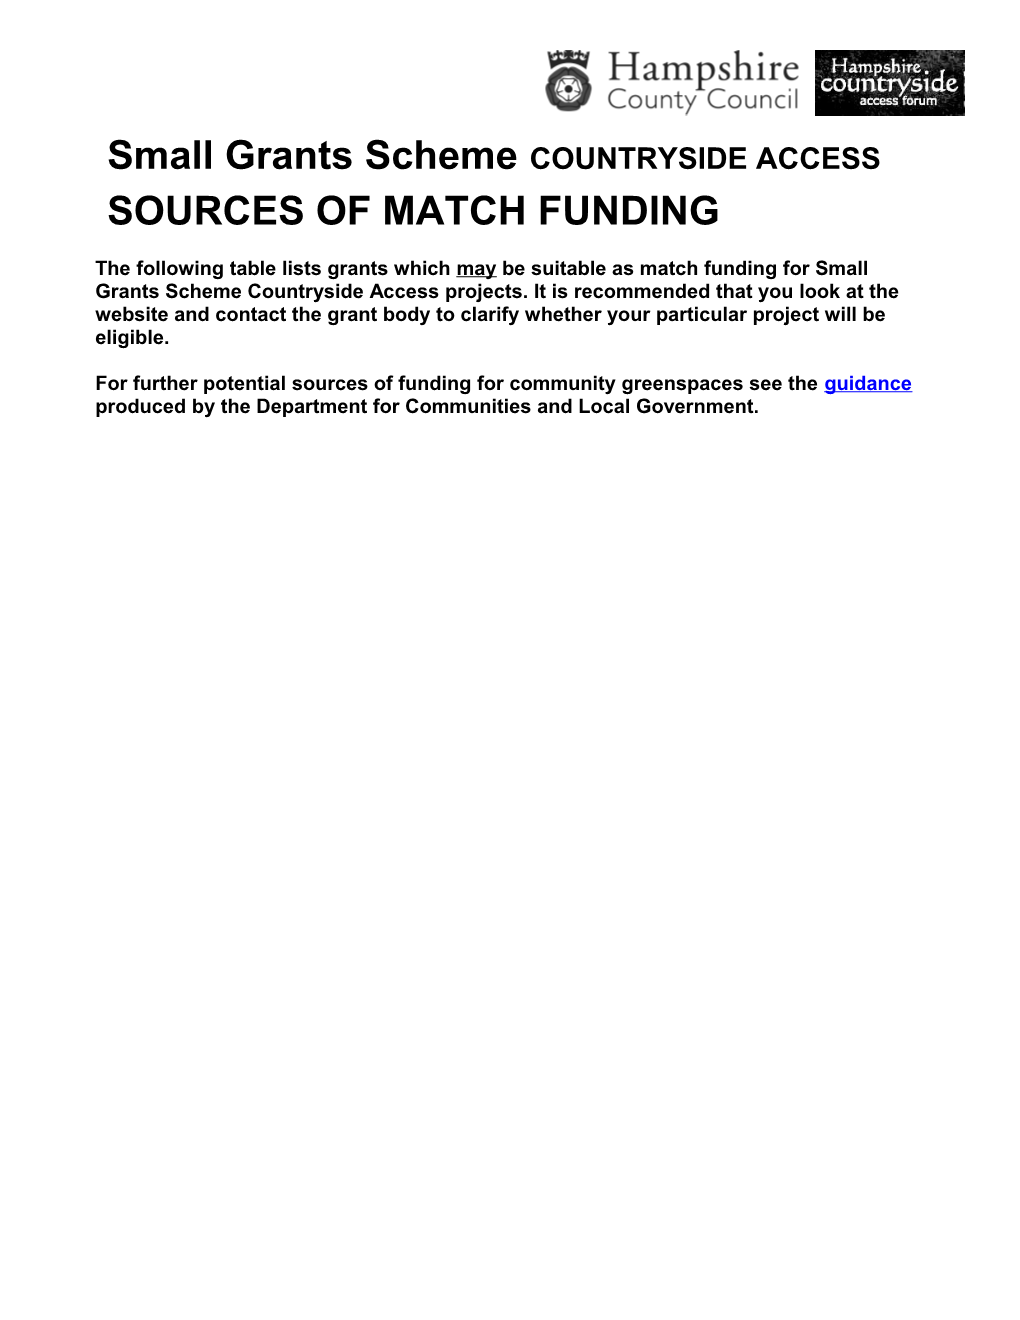 For Further Potential Sources of Funding for Community Greenspaces See the Guidance Produced